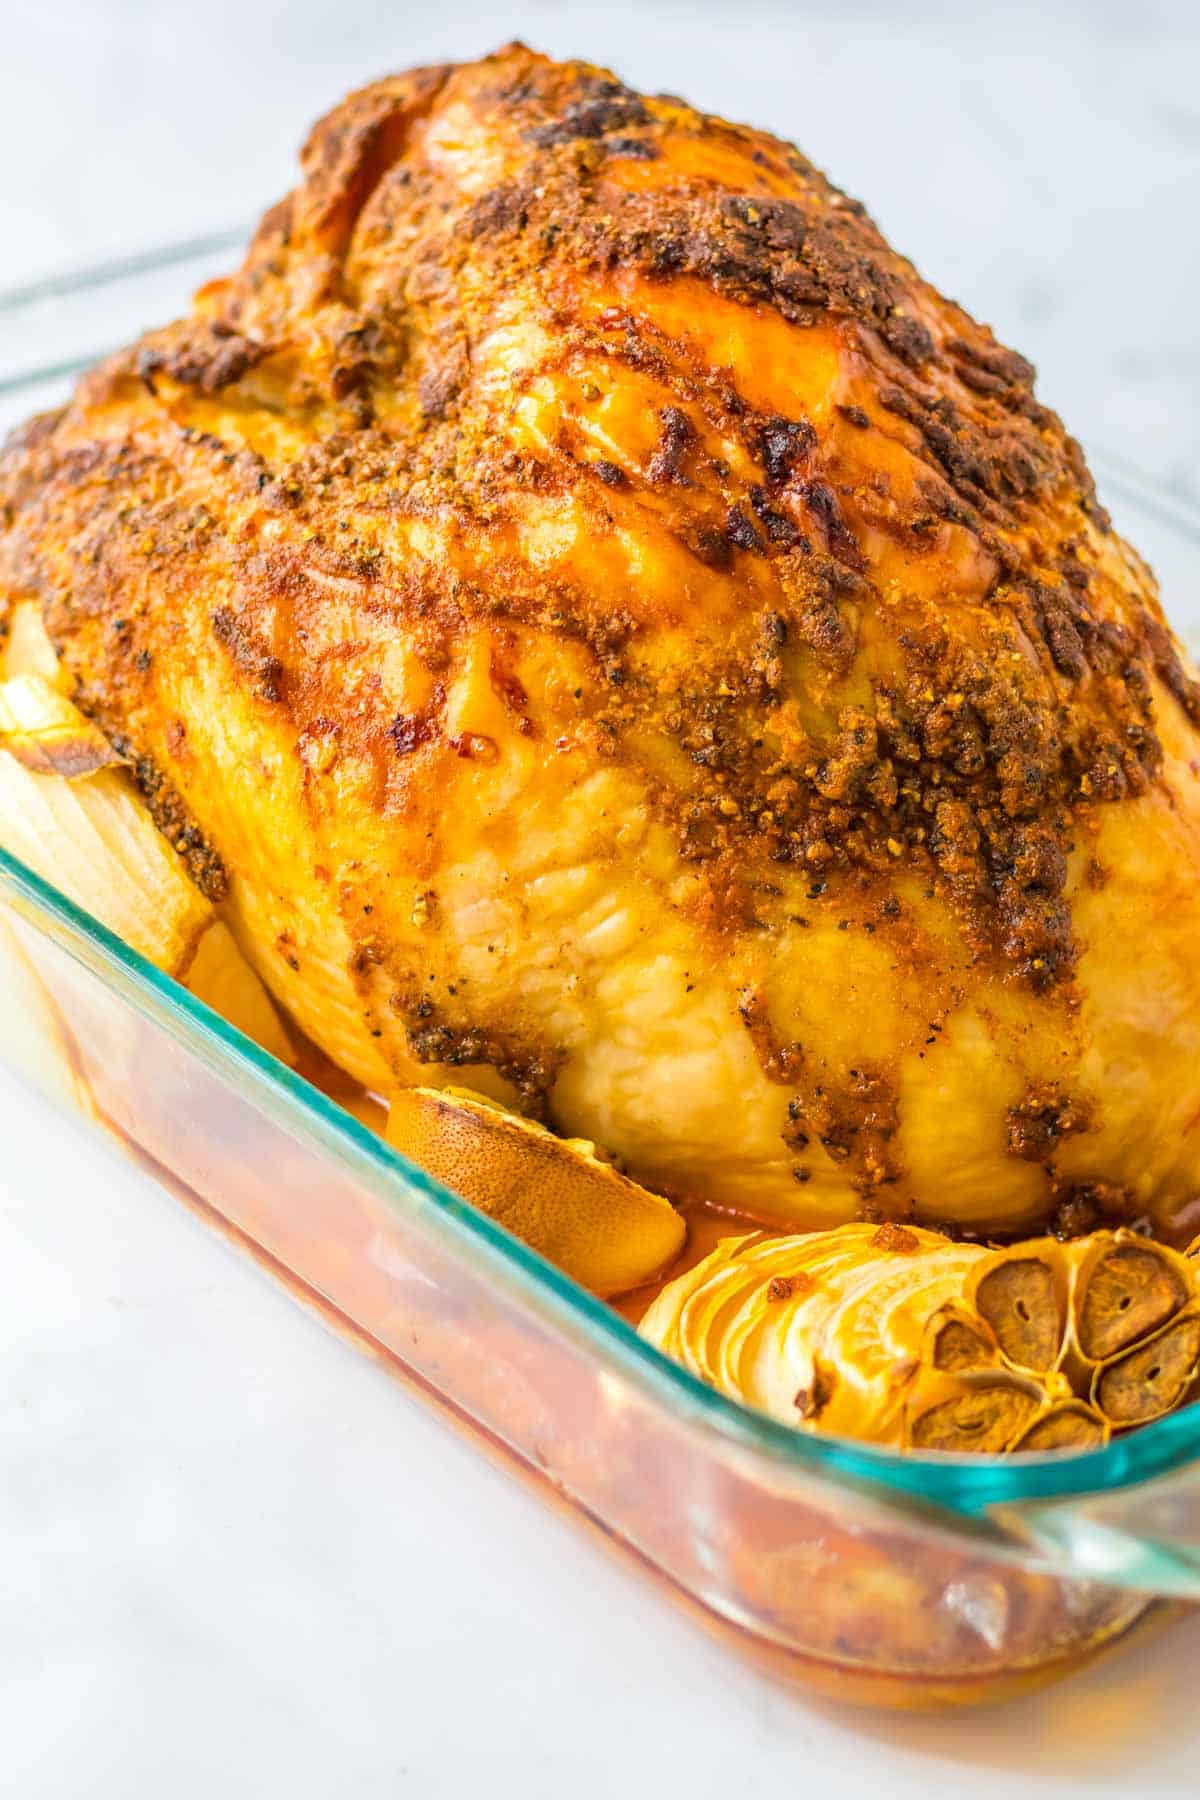 Roasted turkey in a glass baking dish.